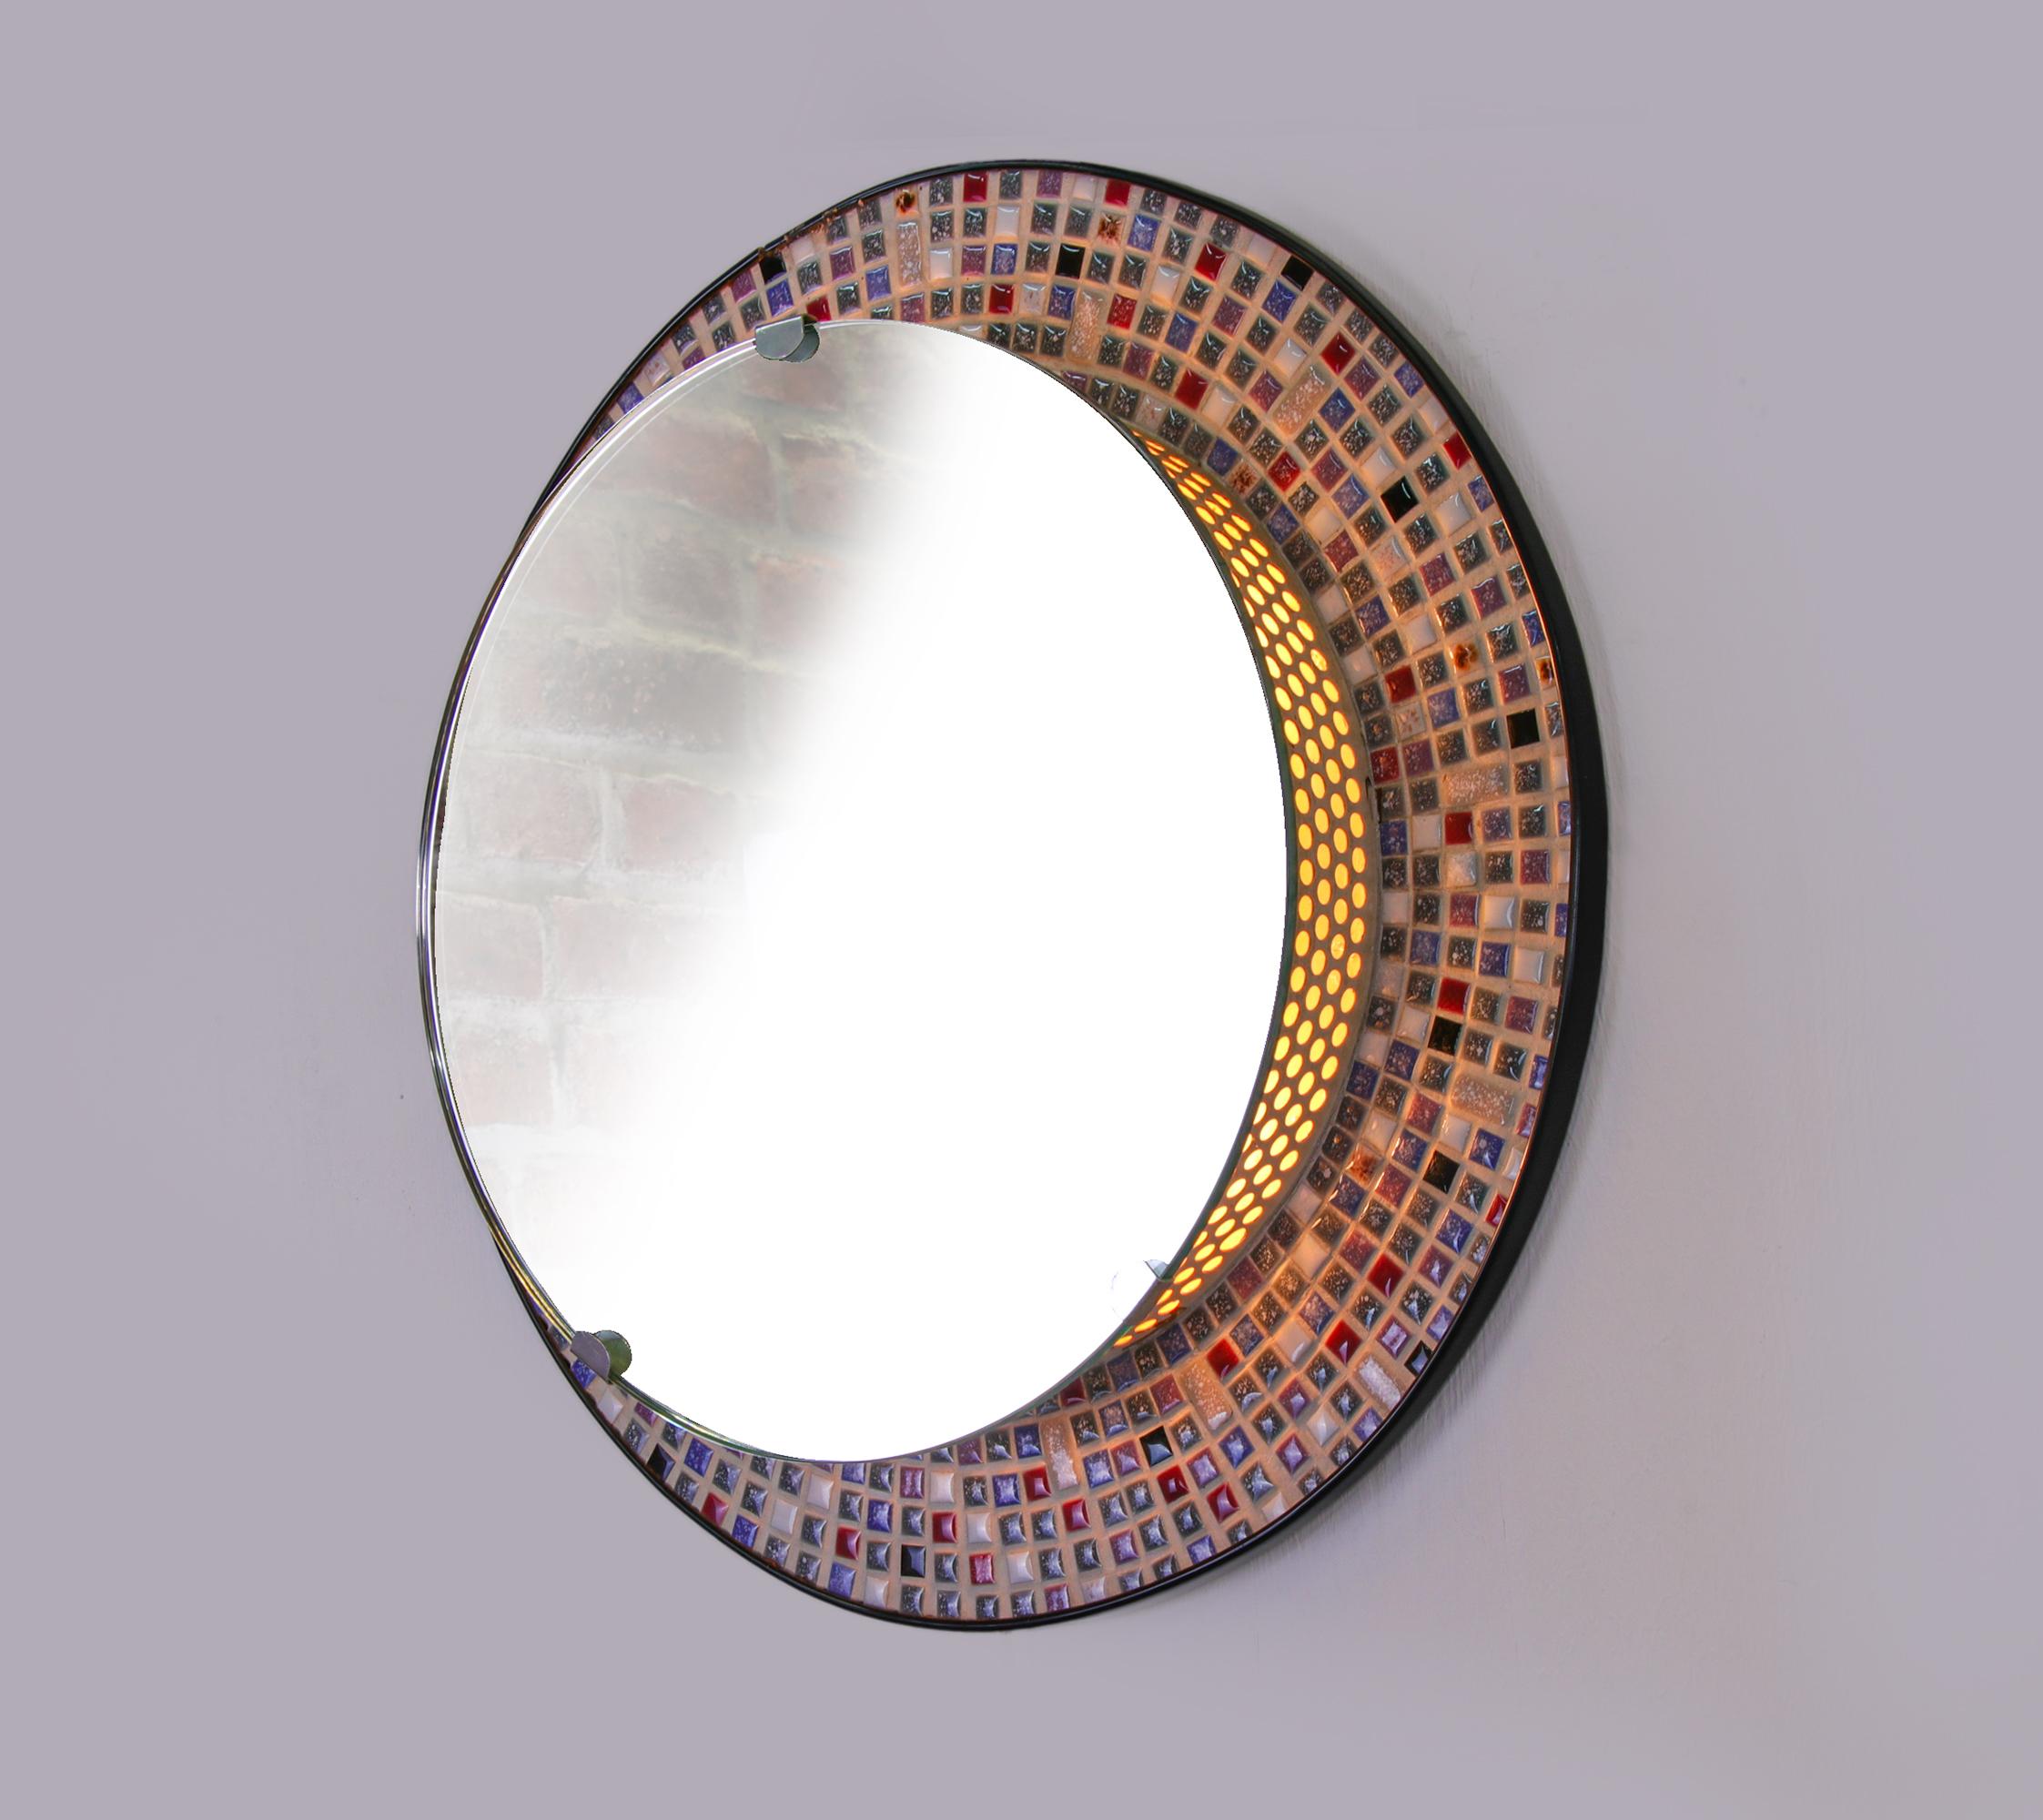 Highly decorative wall mosaic mirror with a illuminated background. Manufactured by Hillebrand attr. in Germany, 1950s. 

The mirror is mounted on a perforated metal base, the lighting is hidden behind it and it is edged with multicolored porcelain